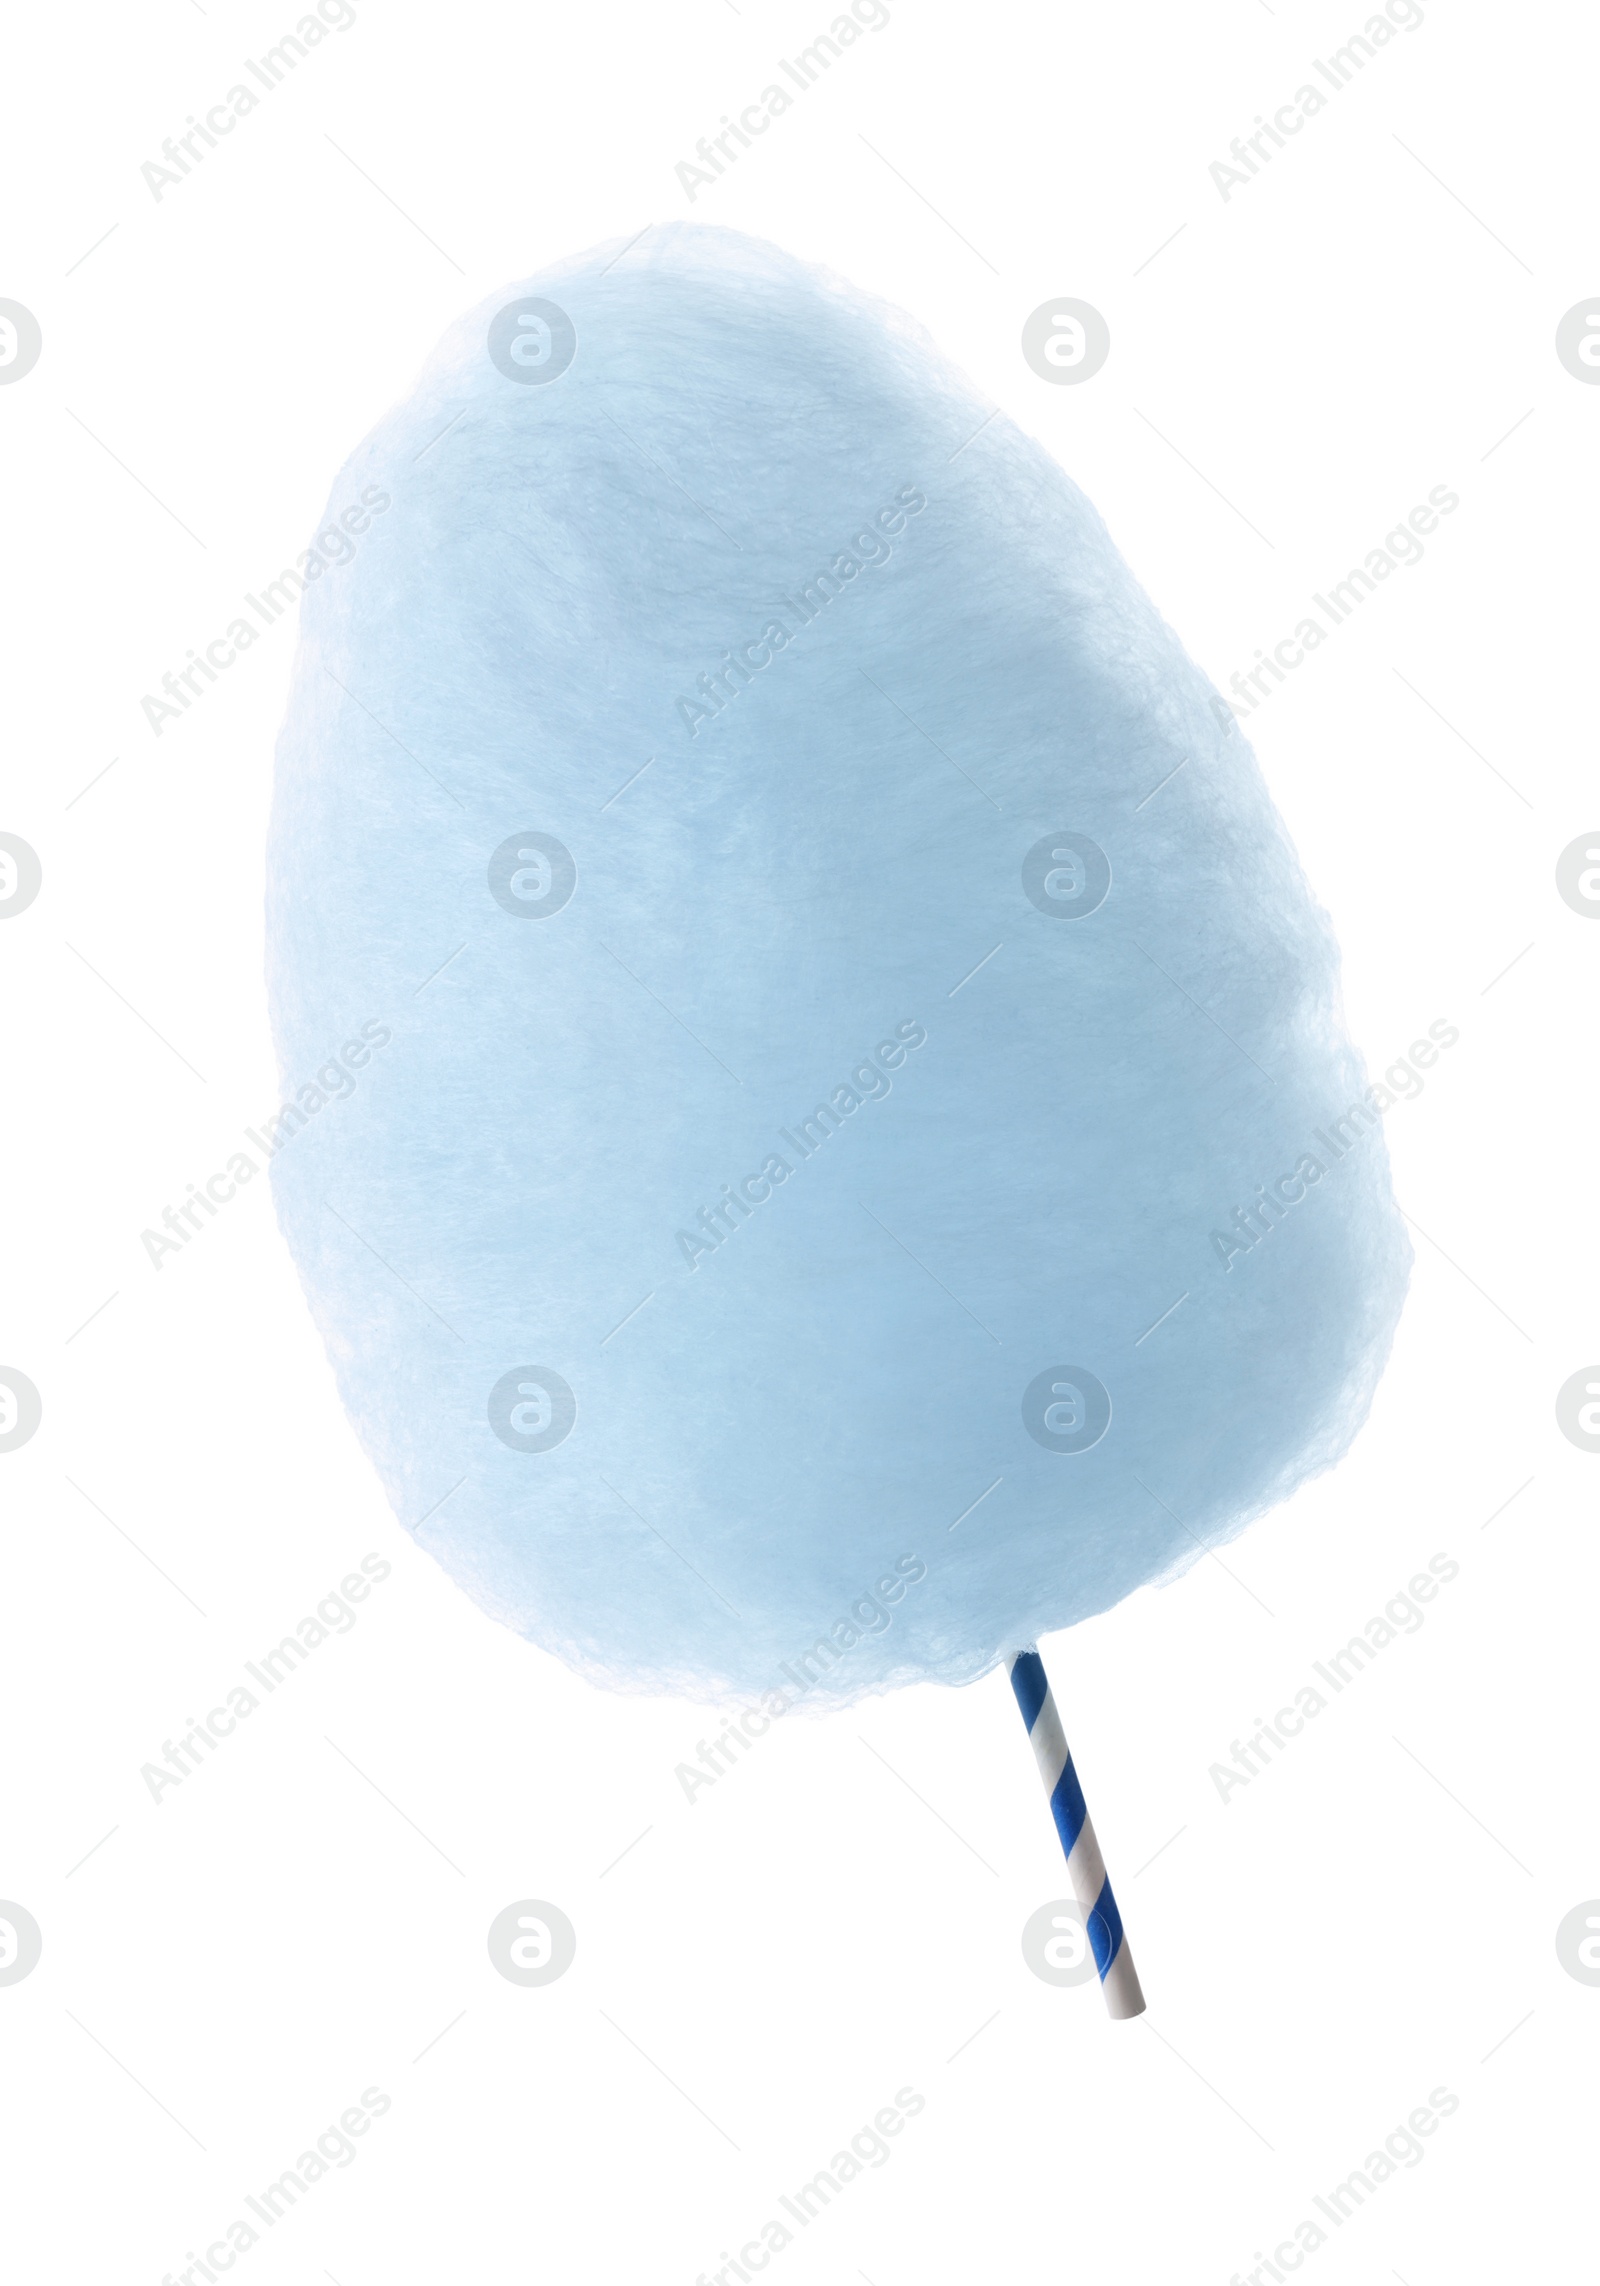 Photo of Stick with yummy cotton candy isolated on white